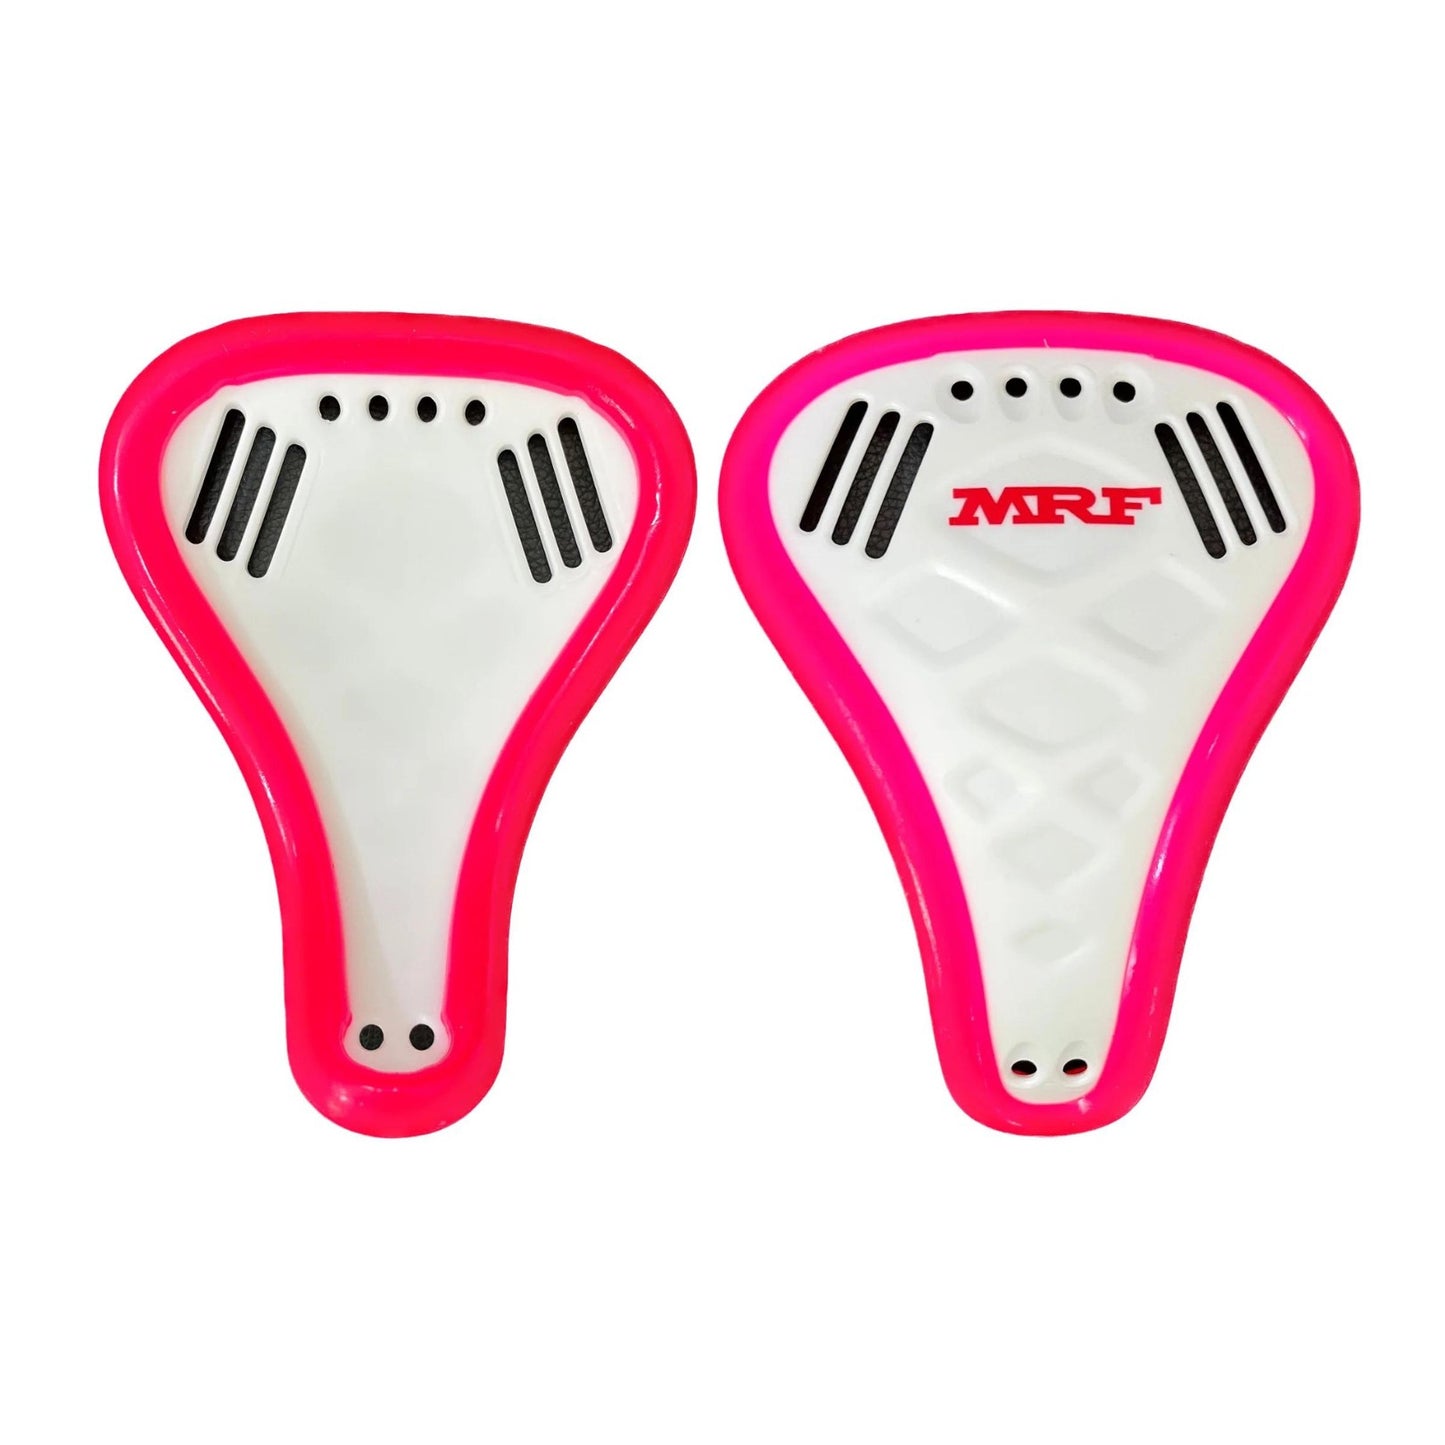 MRF Abdomen Guard Women Girls Protective Gear for Cricket & Other Sports Adult and Junior